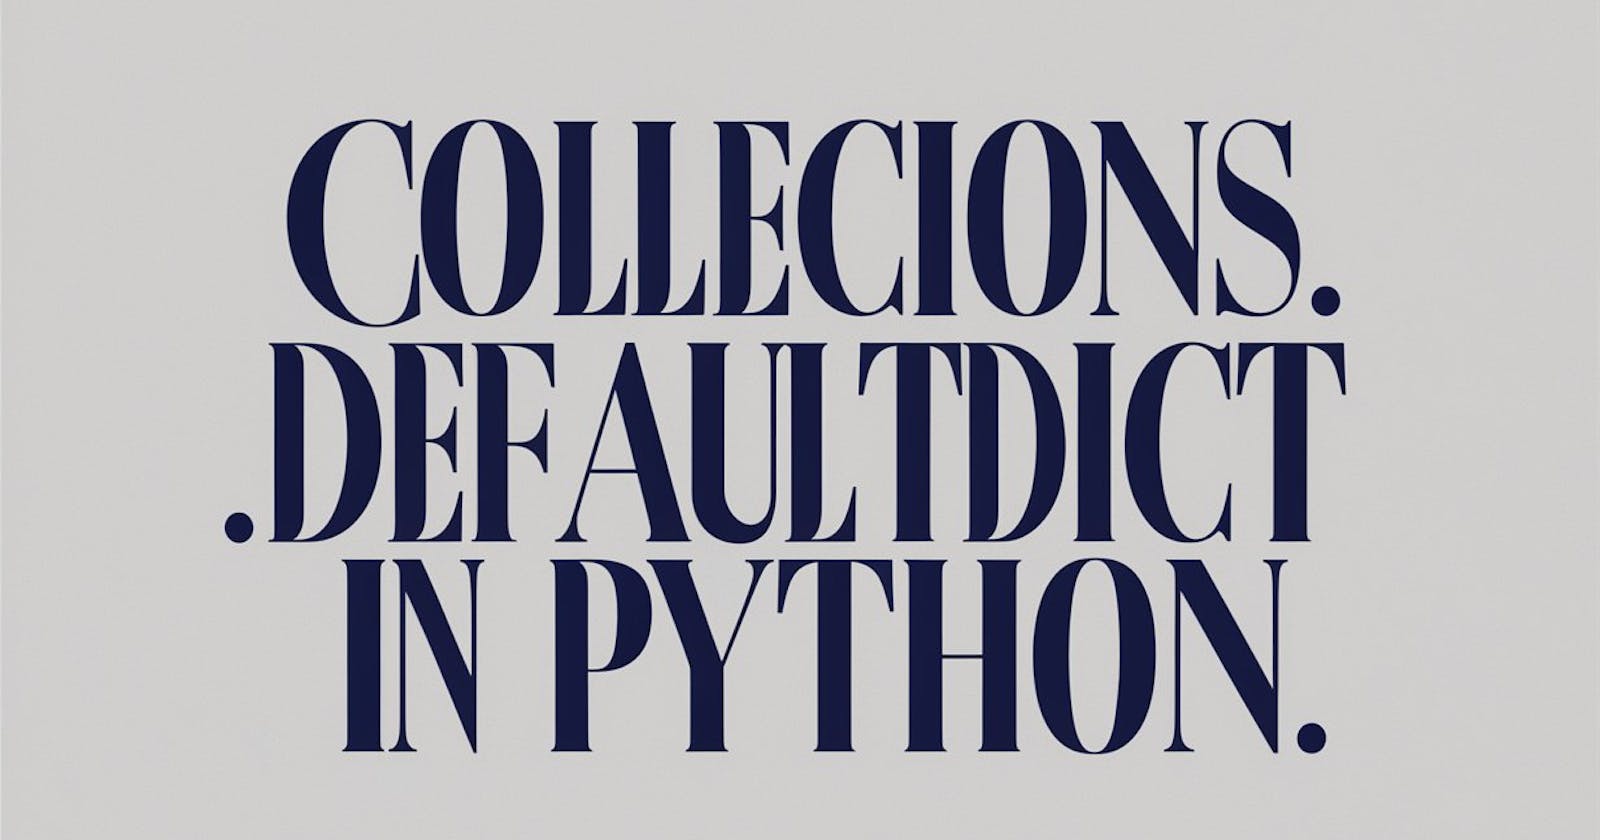 Exploring the Functionality of collections.defaultdict in Python Through 5 Examples